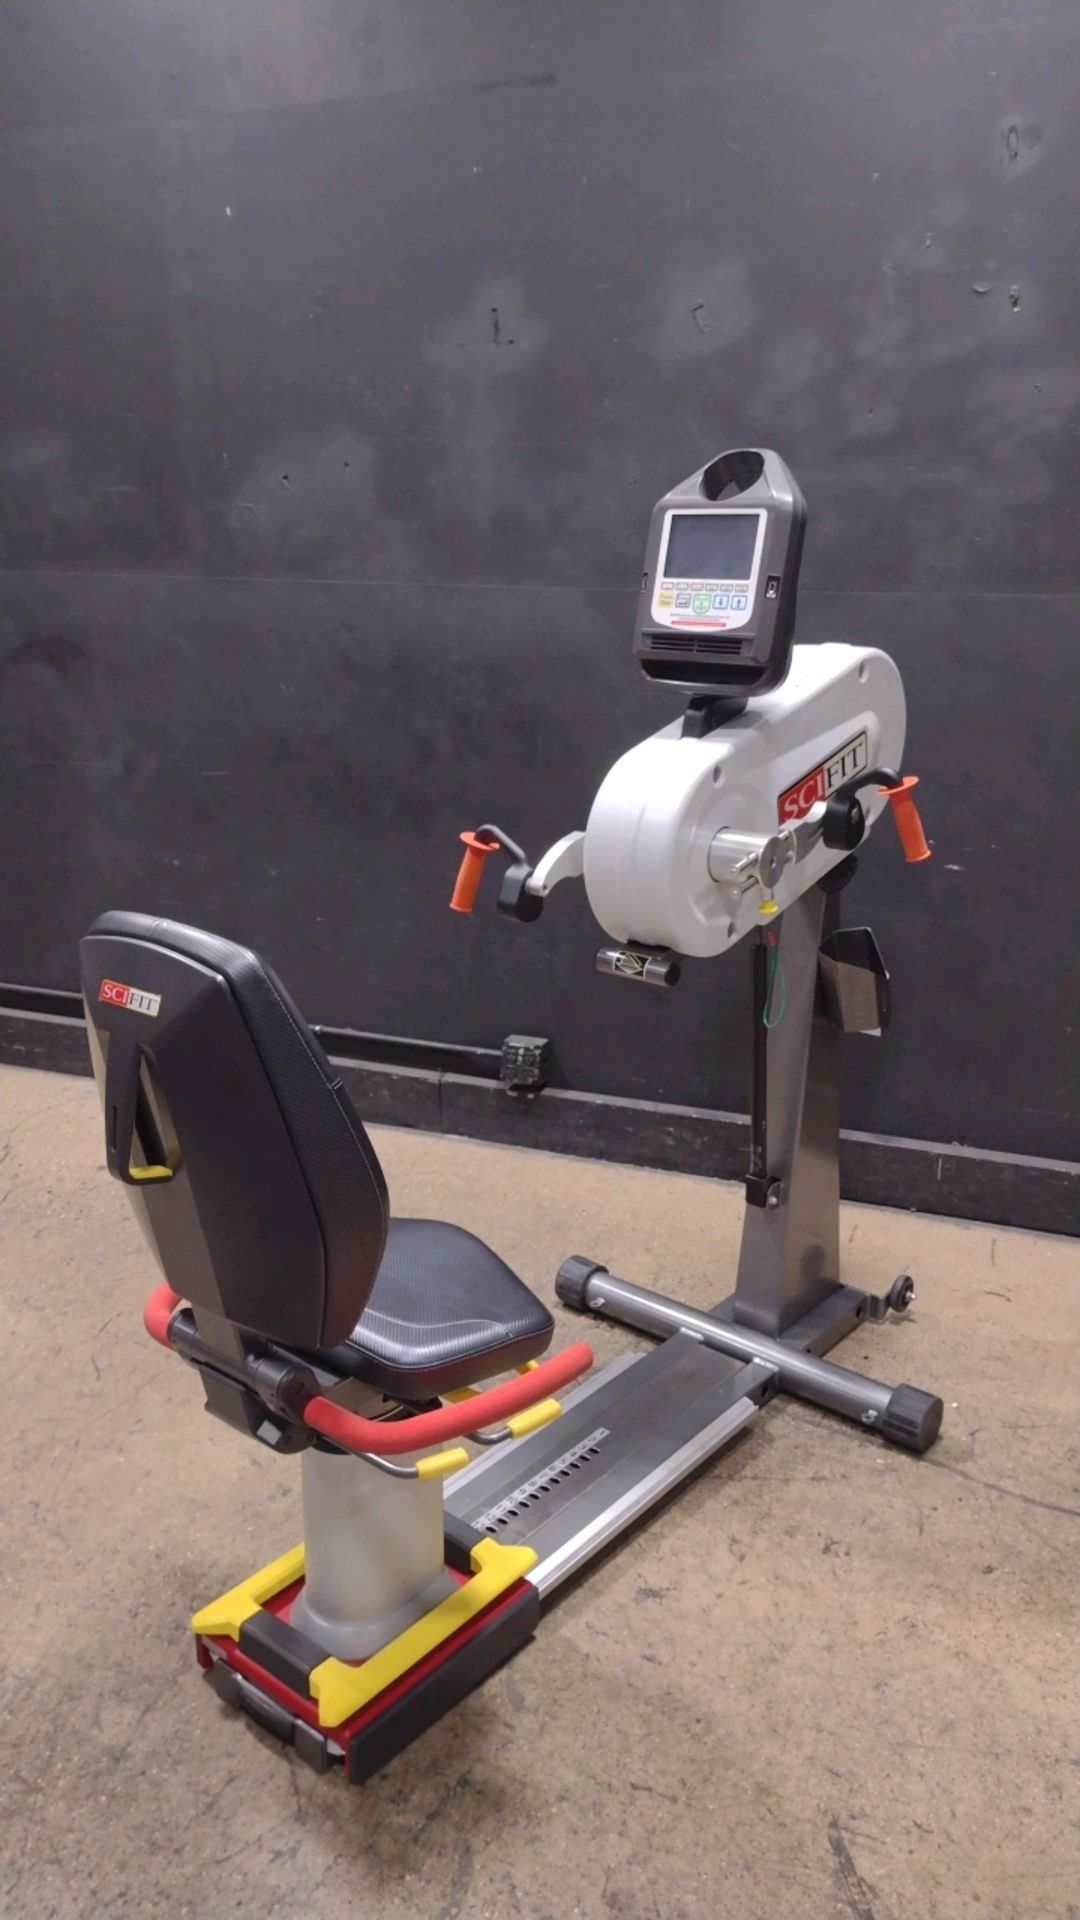 SCIFIT PRO 1 ERGOMETER (LOCATED AT 3325 MOUNT PROSPECT ROAD, FRANKLIN PARK, IL, 60131) - Image 2 of 2